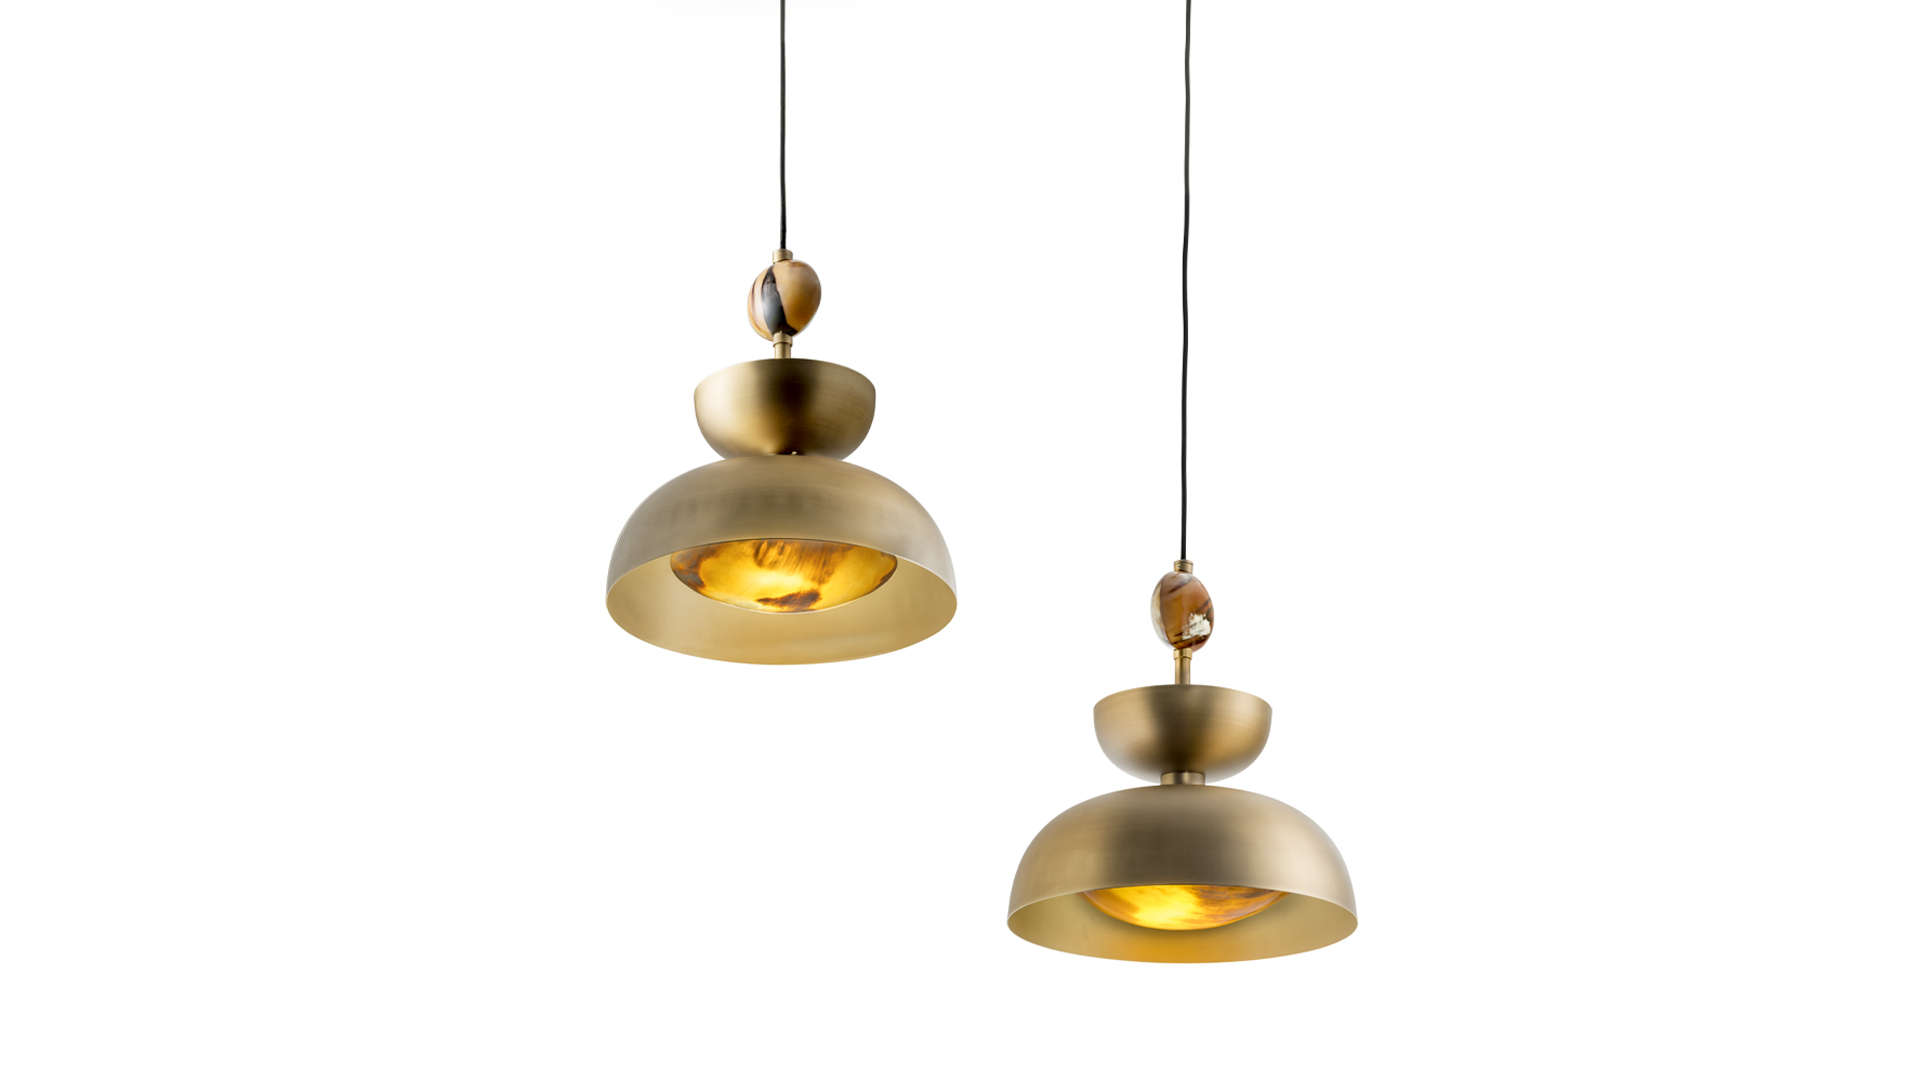 Lamps - Vesuvio suspension lamp in horn and satin brass - cover - Arcahorn